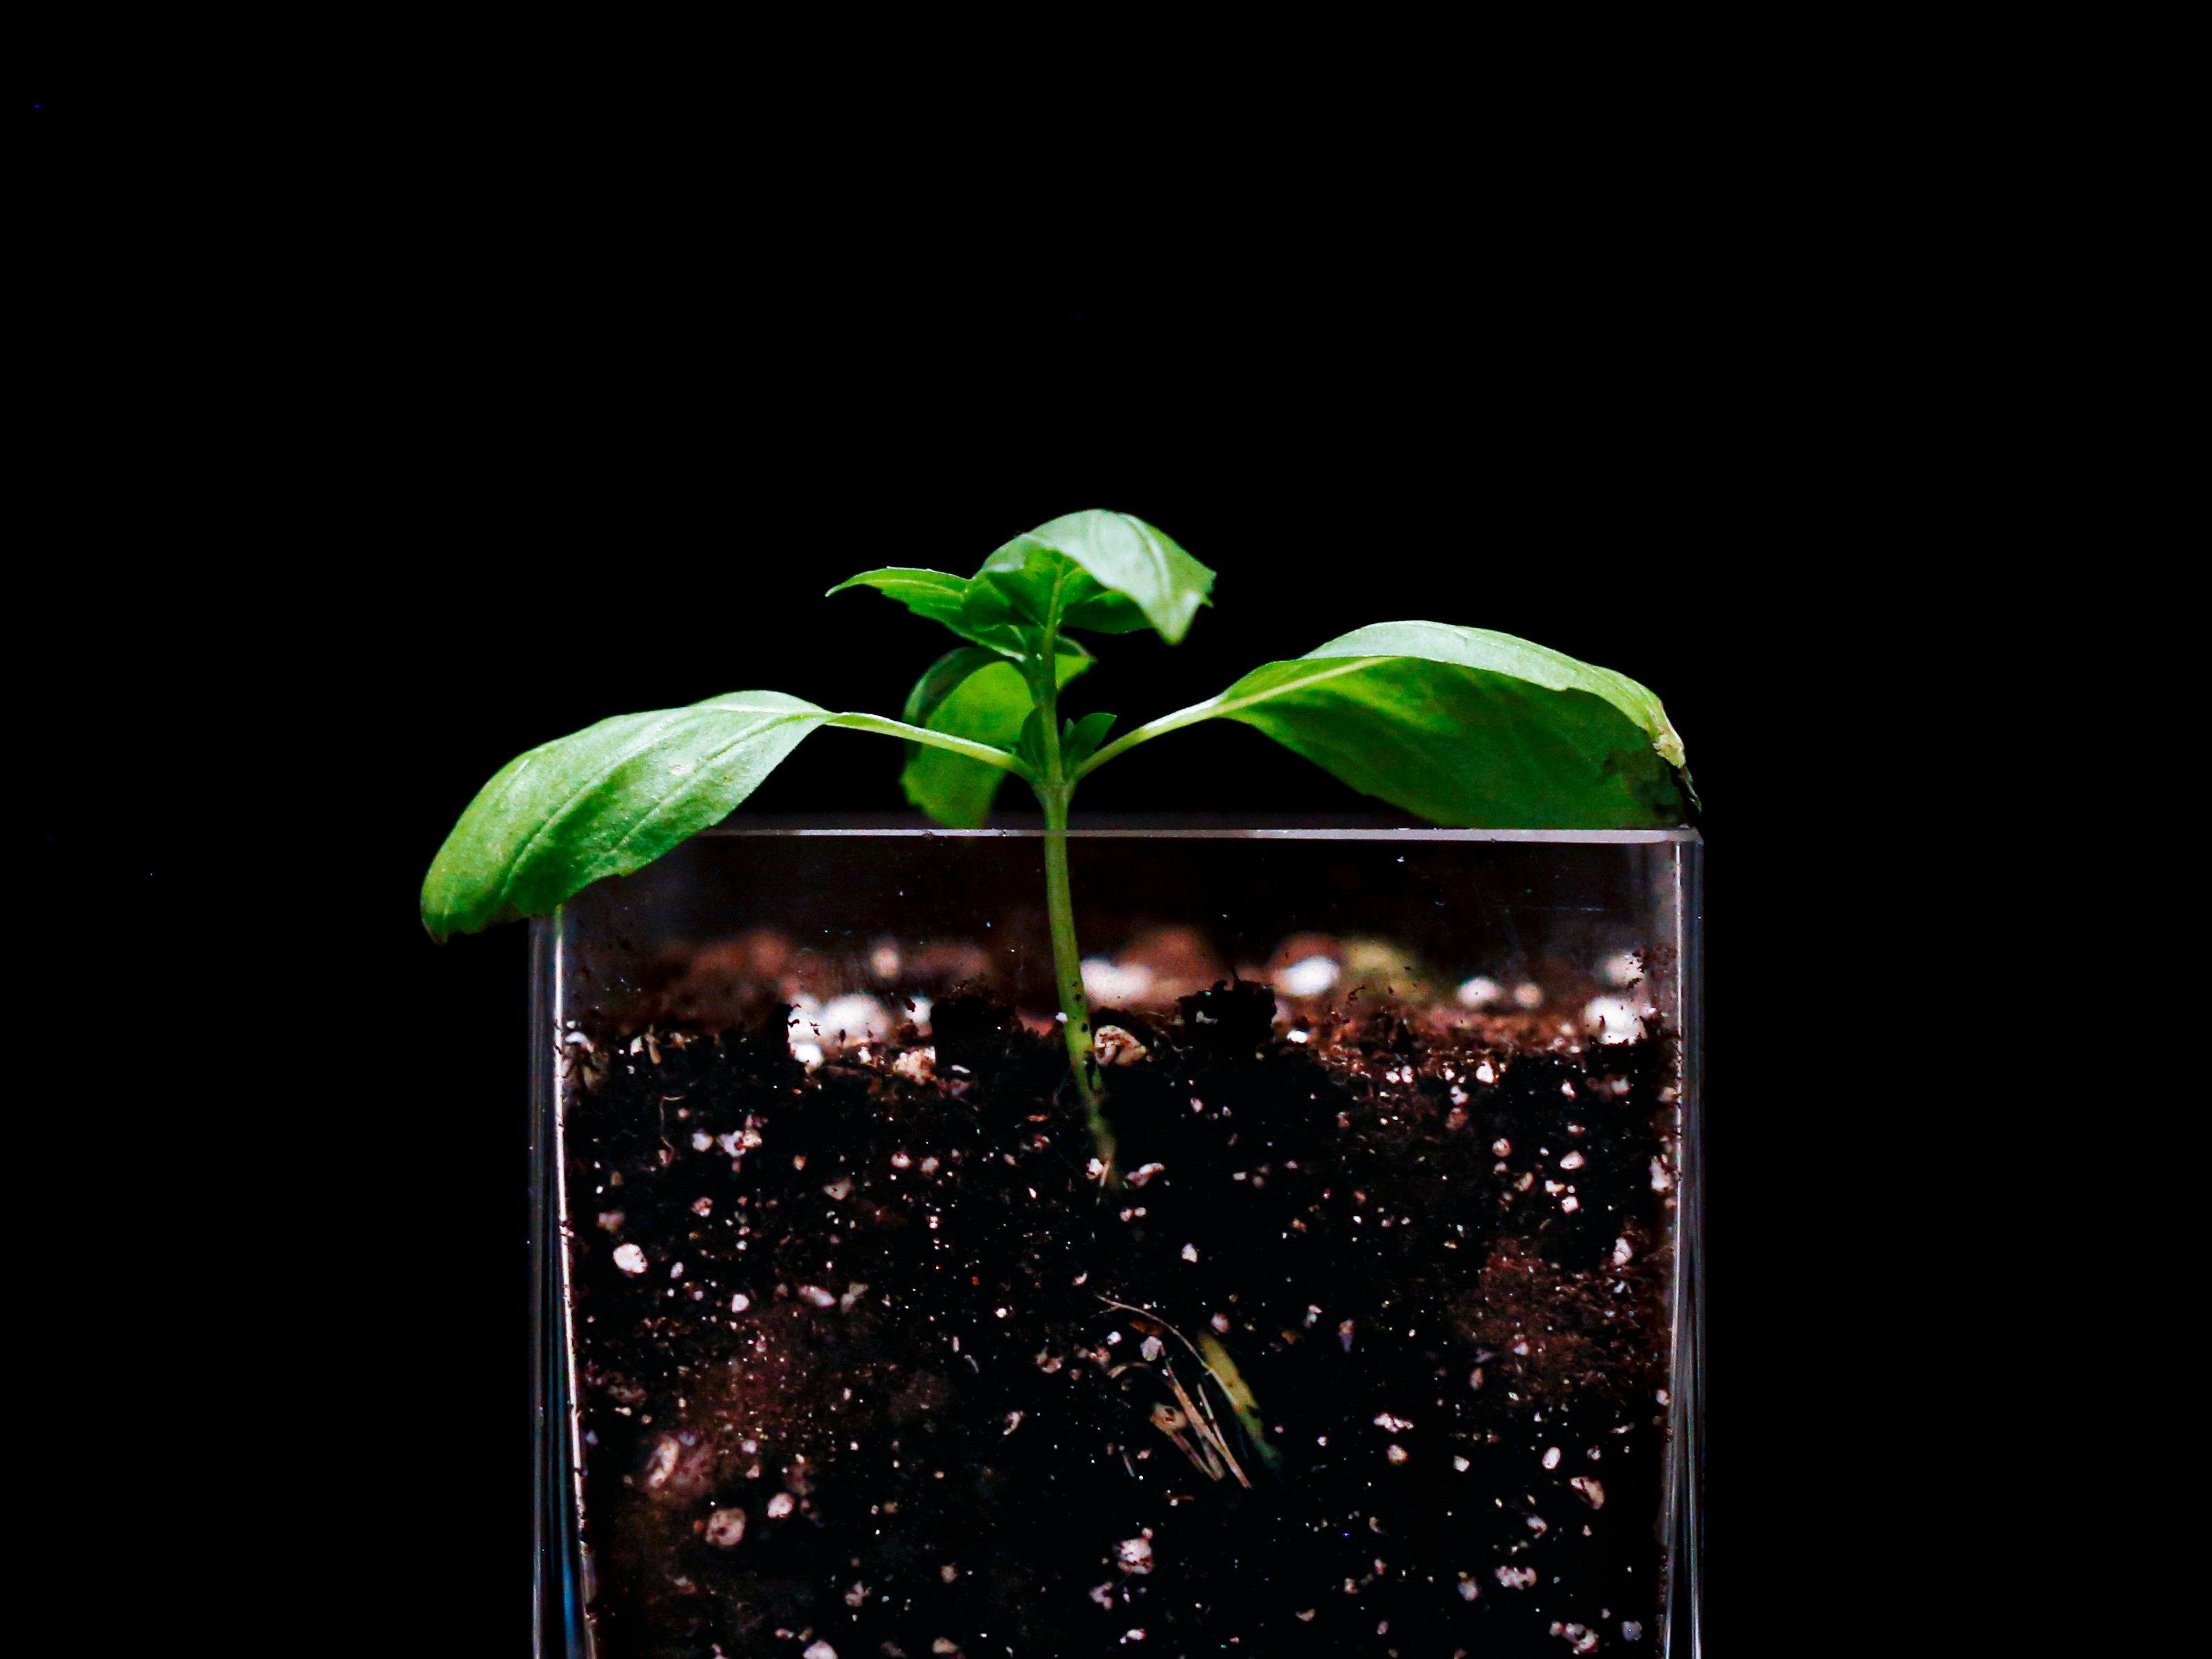 Track your newly planted basil seeds or sprout basil in a sprouting jar